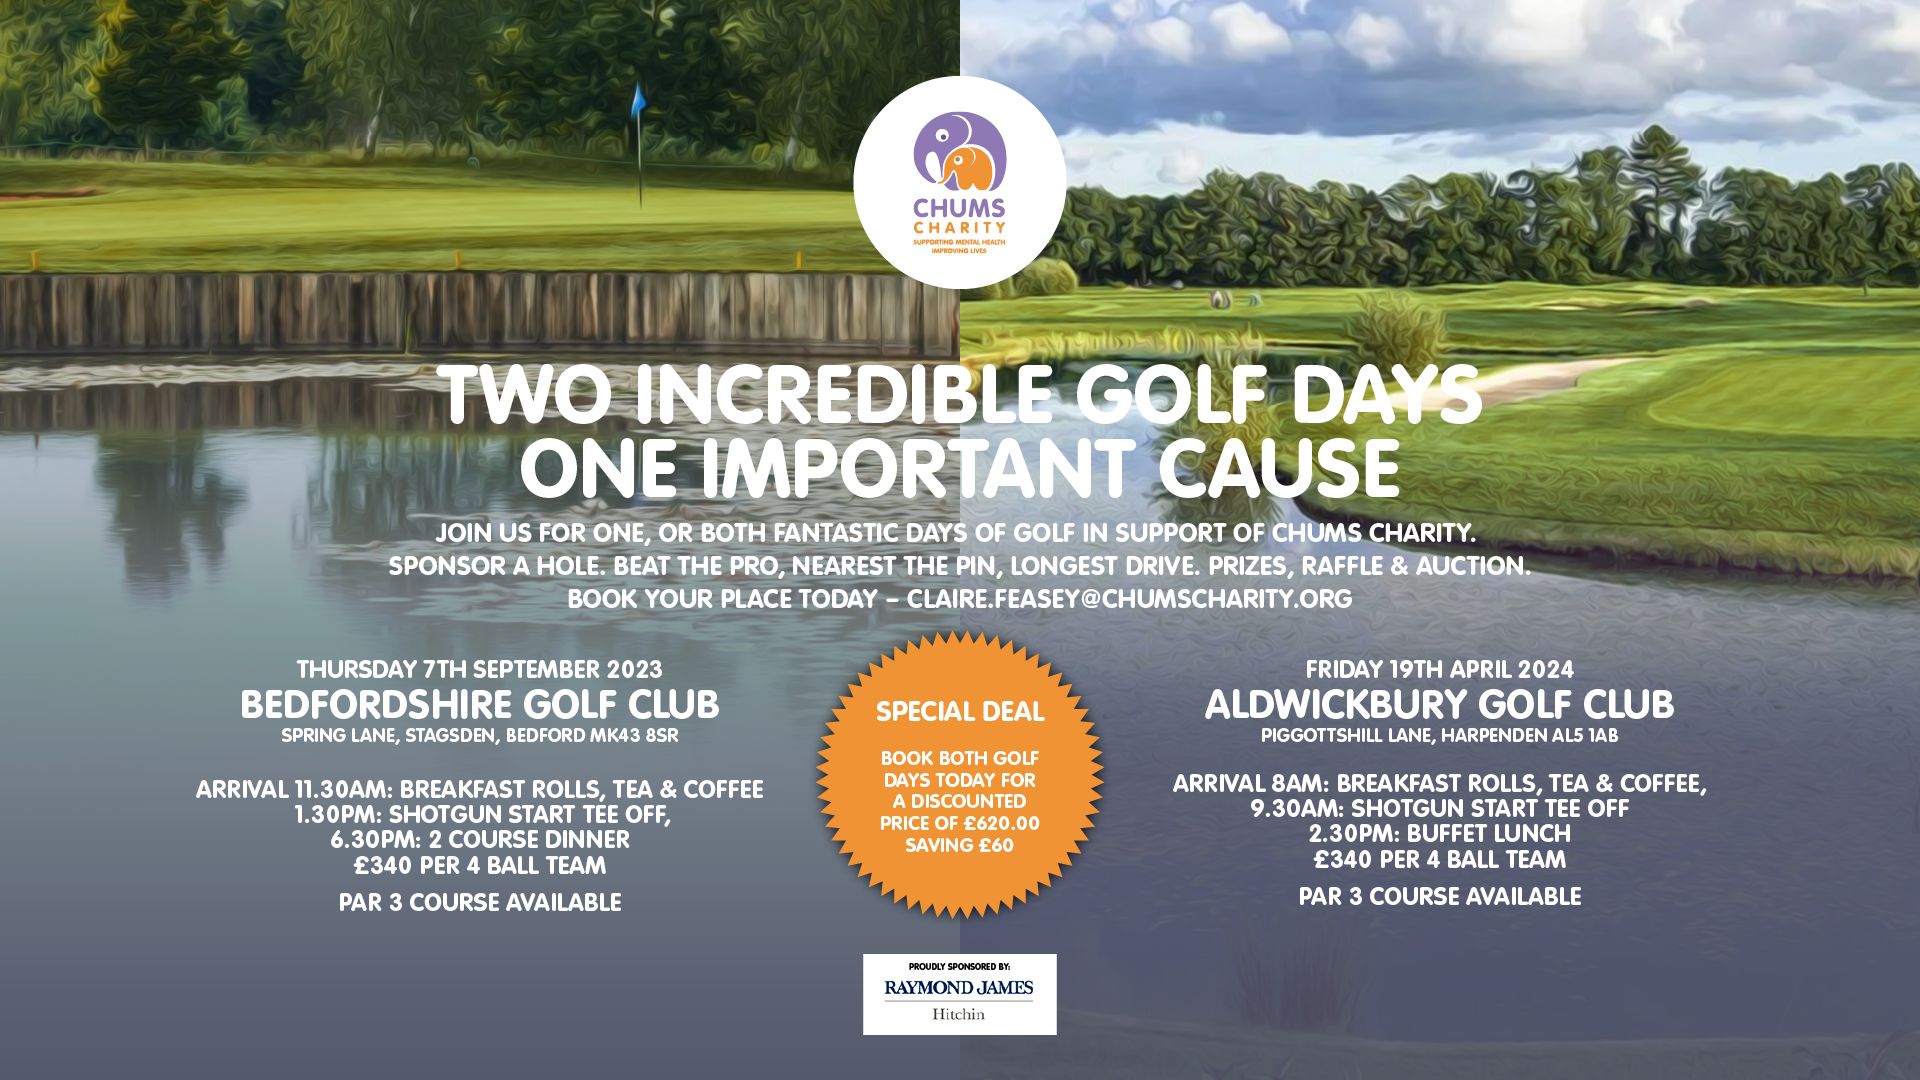 TWO INCREDIBLE GOLF DAYS ONE IMPORTANT CAUSE JOIN US FOR ONE, OR BOTH FANTASTIC DAYS OF GOLF IN SUPPORT OF CHUMS CHARITY. SPONSOR A HOLE. BEAT THE PRO, NEAREST THE PIN, LONGEST DRIVE. PRIZES, RAFFLE & AUCTION. BOOK YOUR PLACE TODAY.